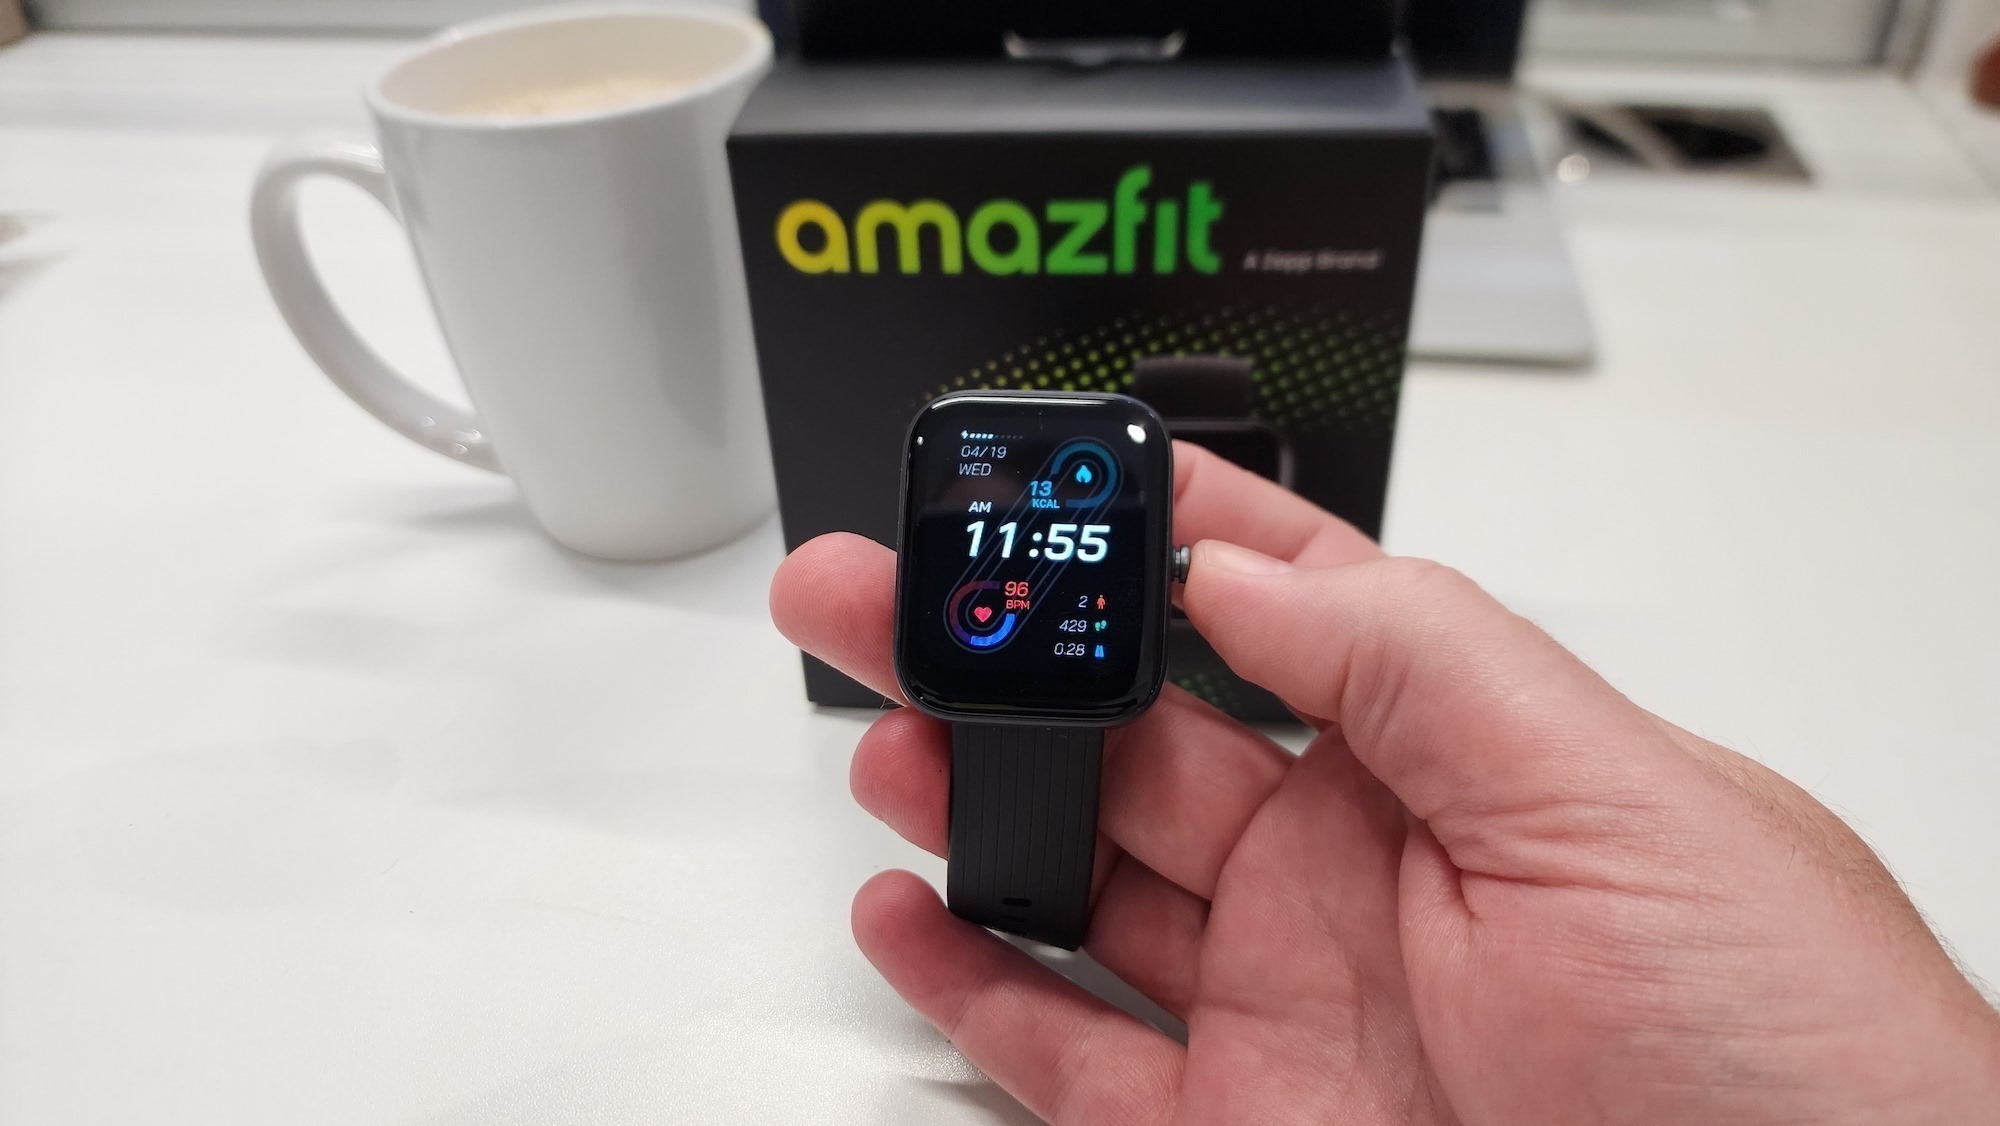 Amazfit Bip 3 And Bip 3 Pro Launched Starting At RM199 –